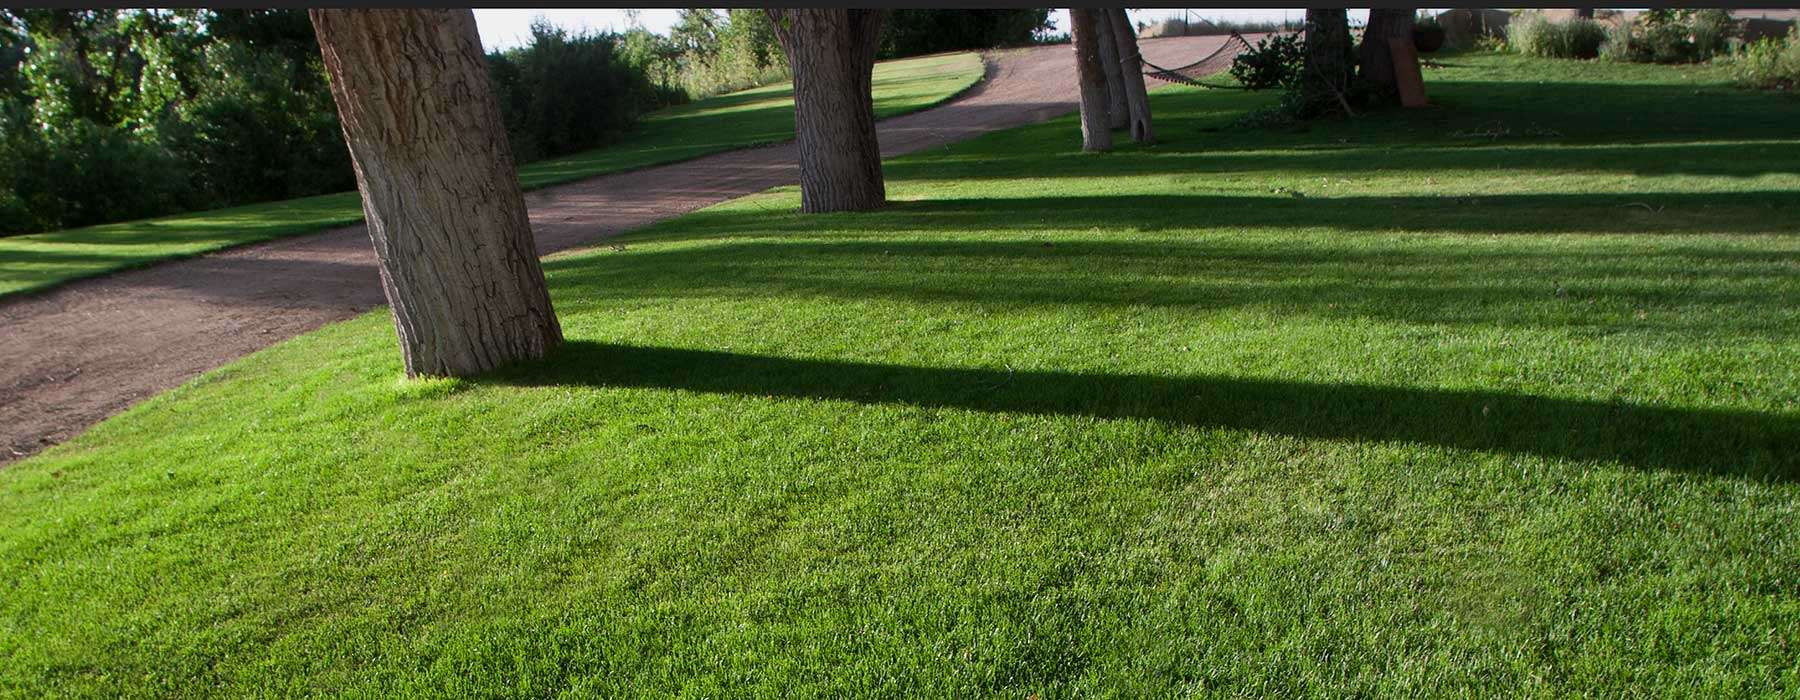 A country bluegrass lawn in Littleton, CO.